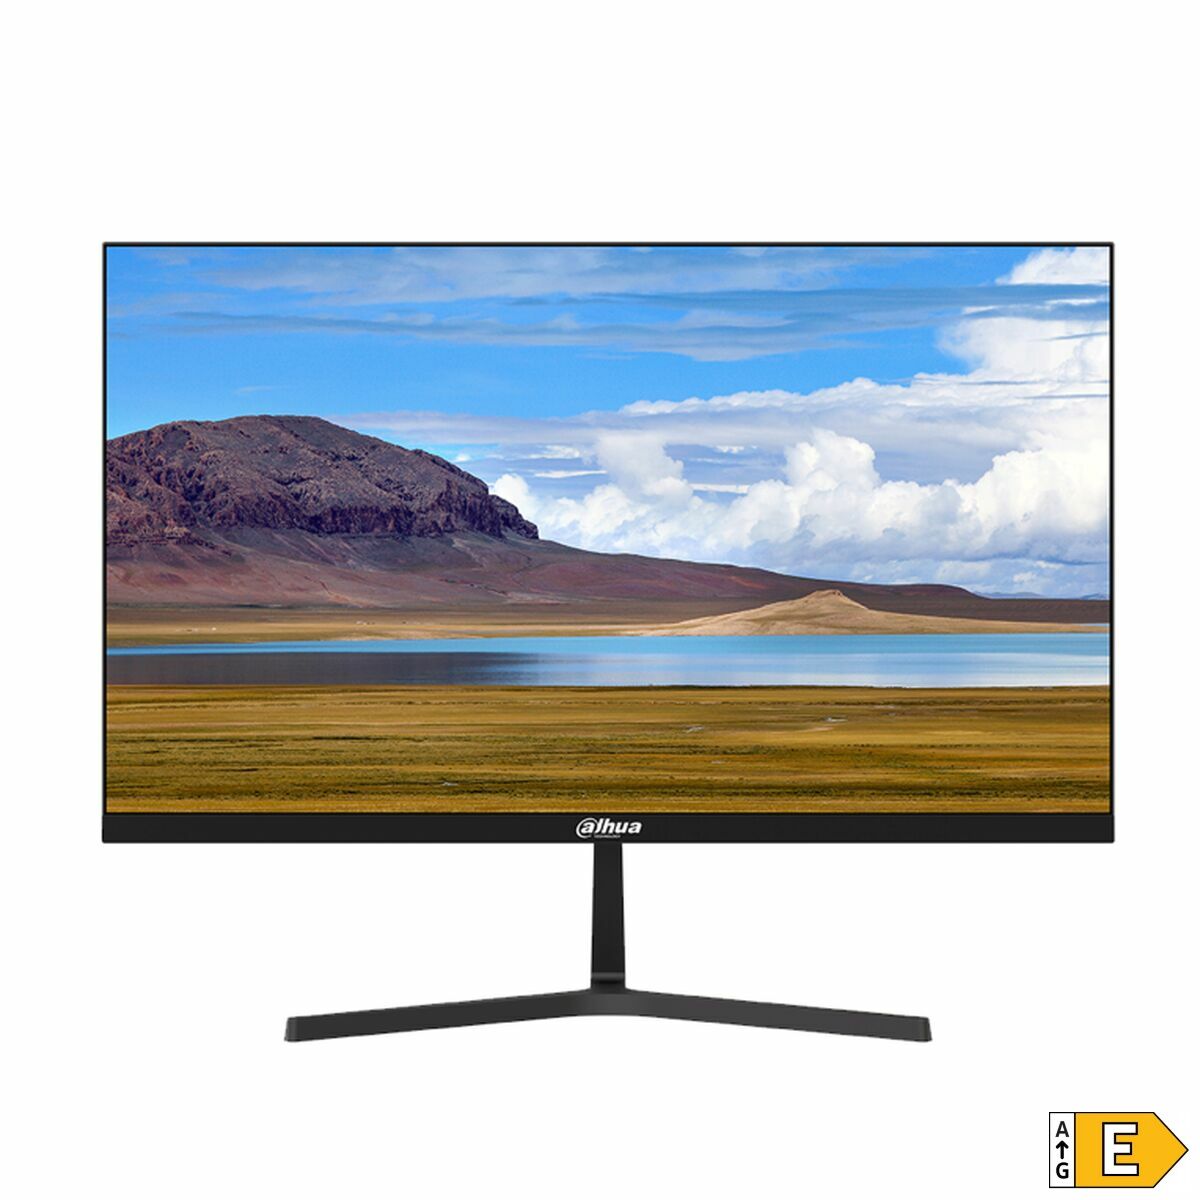 Monitor Dahua DHI-LM24-B200S 23,8" LED IPS Full HD 75 Hz, Dahua, Computing, monitor-dahua-hi-lm24-b200s-23-8-1080-px-led-ips, :Full HD, Brand_Dahua, category-reference-2609, category-reference-2642, category-reference-2644, category-reference-t-19685, computers / peripherals, Condition_NEW, office, Price_100 - 200, Teleworking, RiotNook